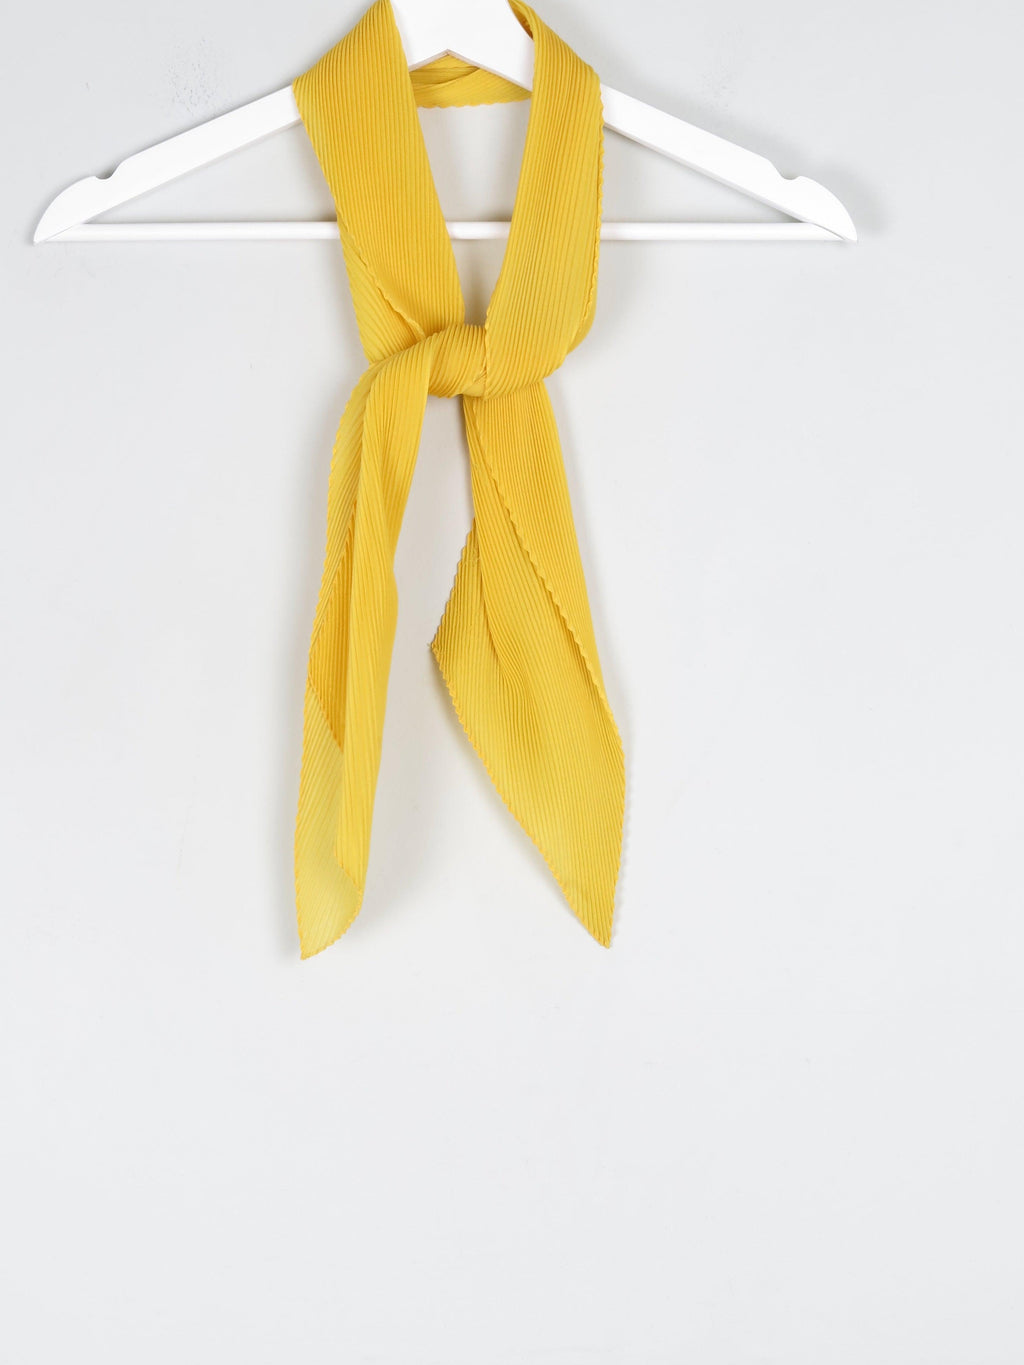 Women's Yellow Pleated Neck Scarf - The Harlequin